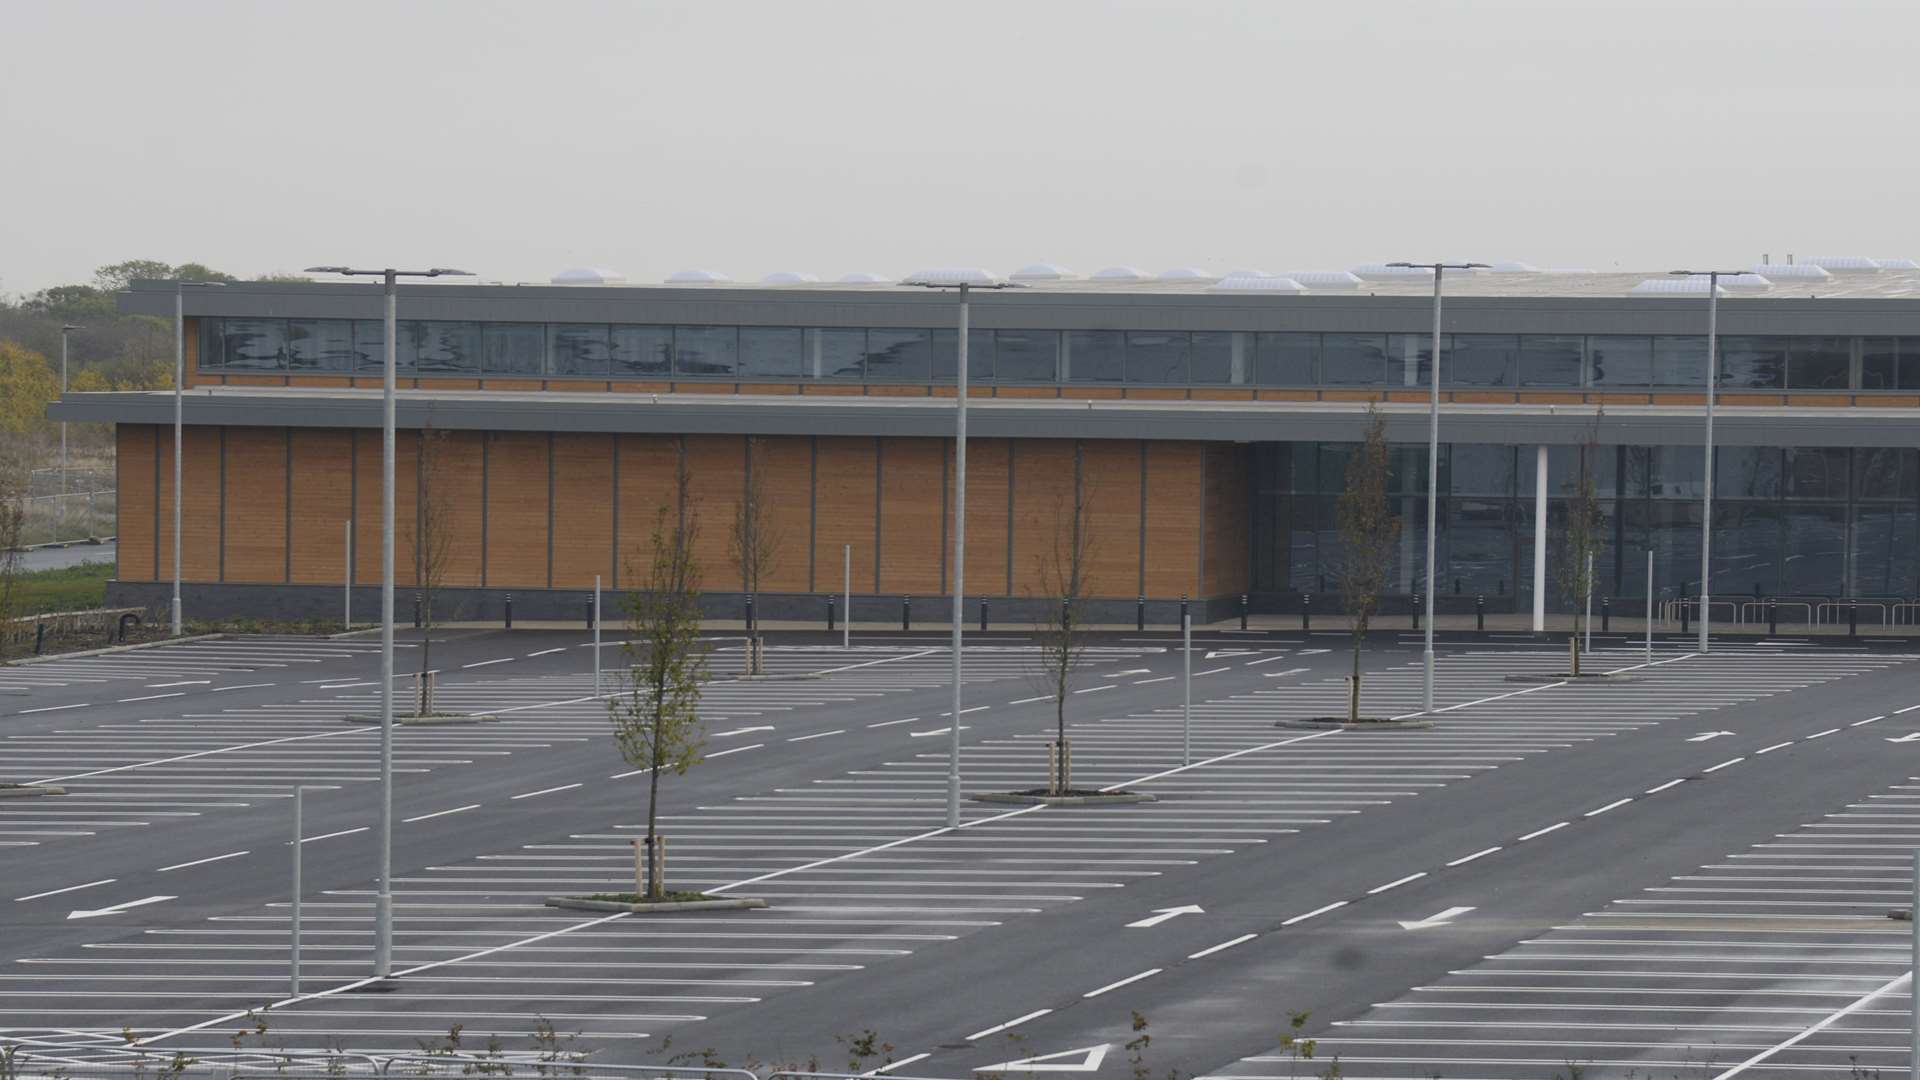 The mothballed Sainsbury’s site at the Altira Business Park